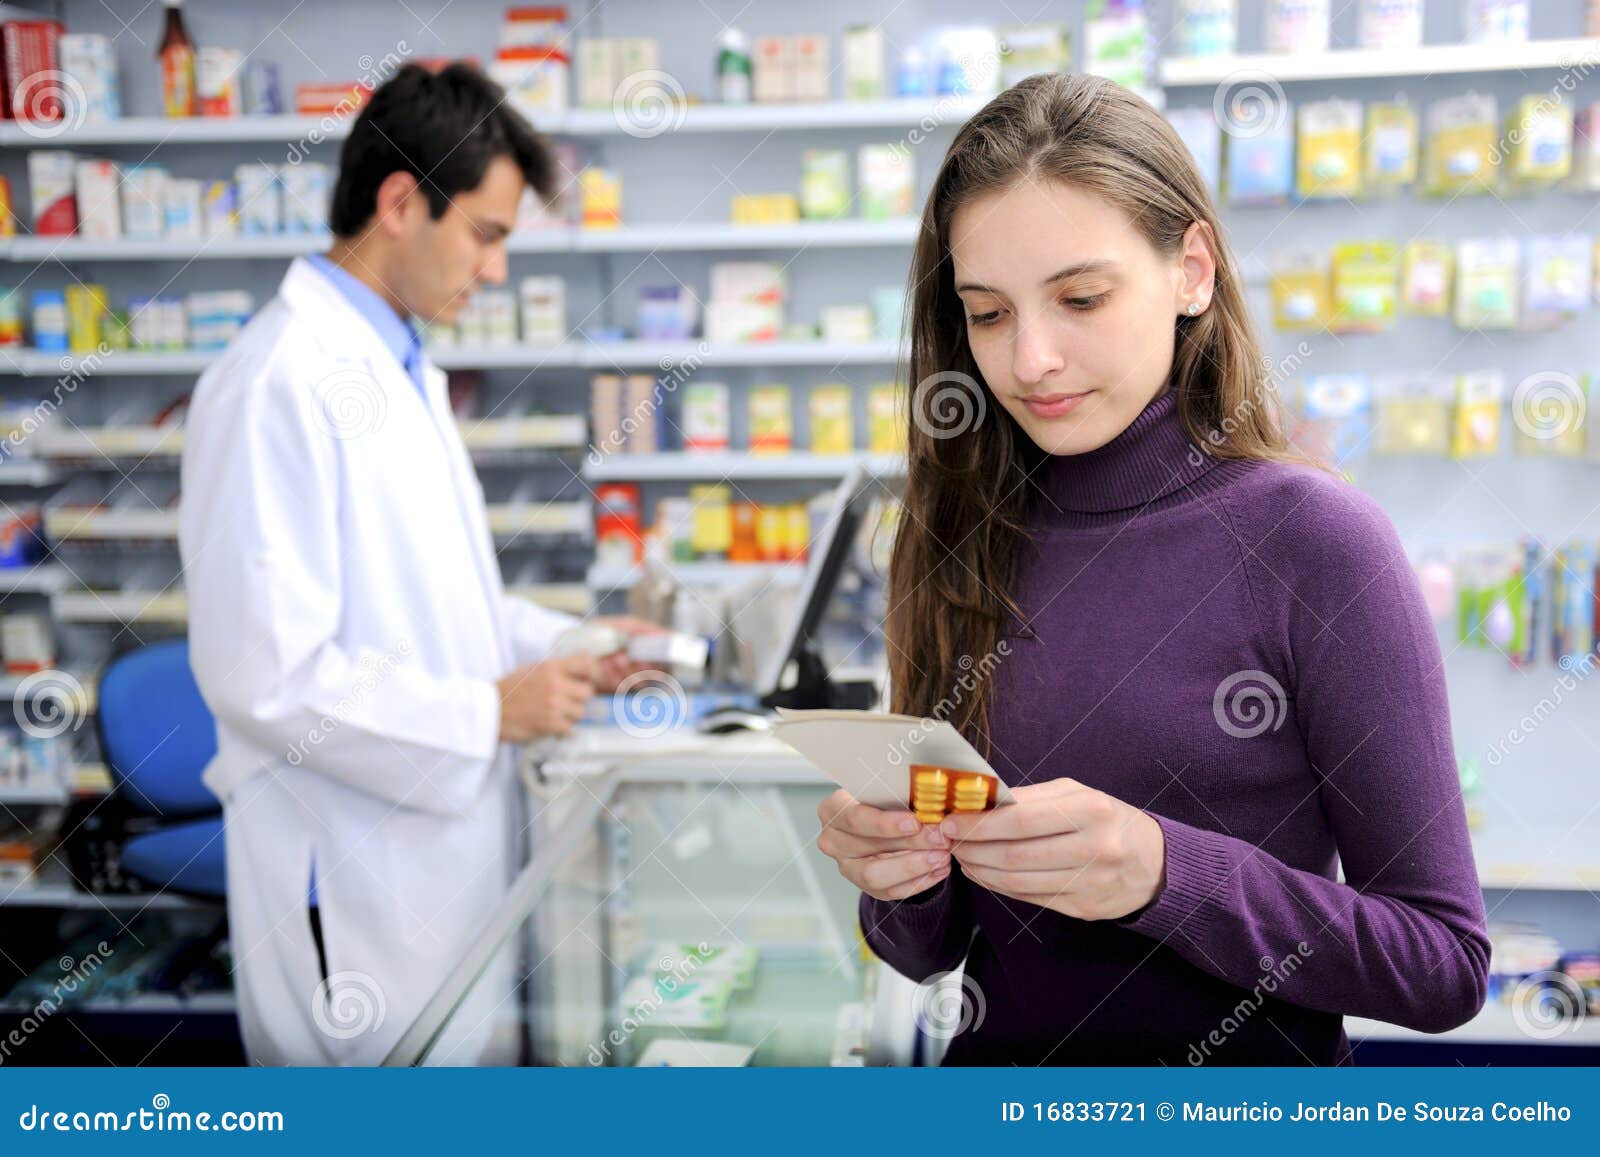 consumer with medicine at pharmacy